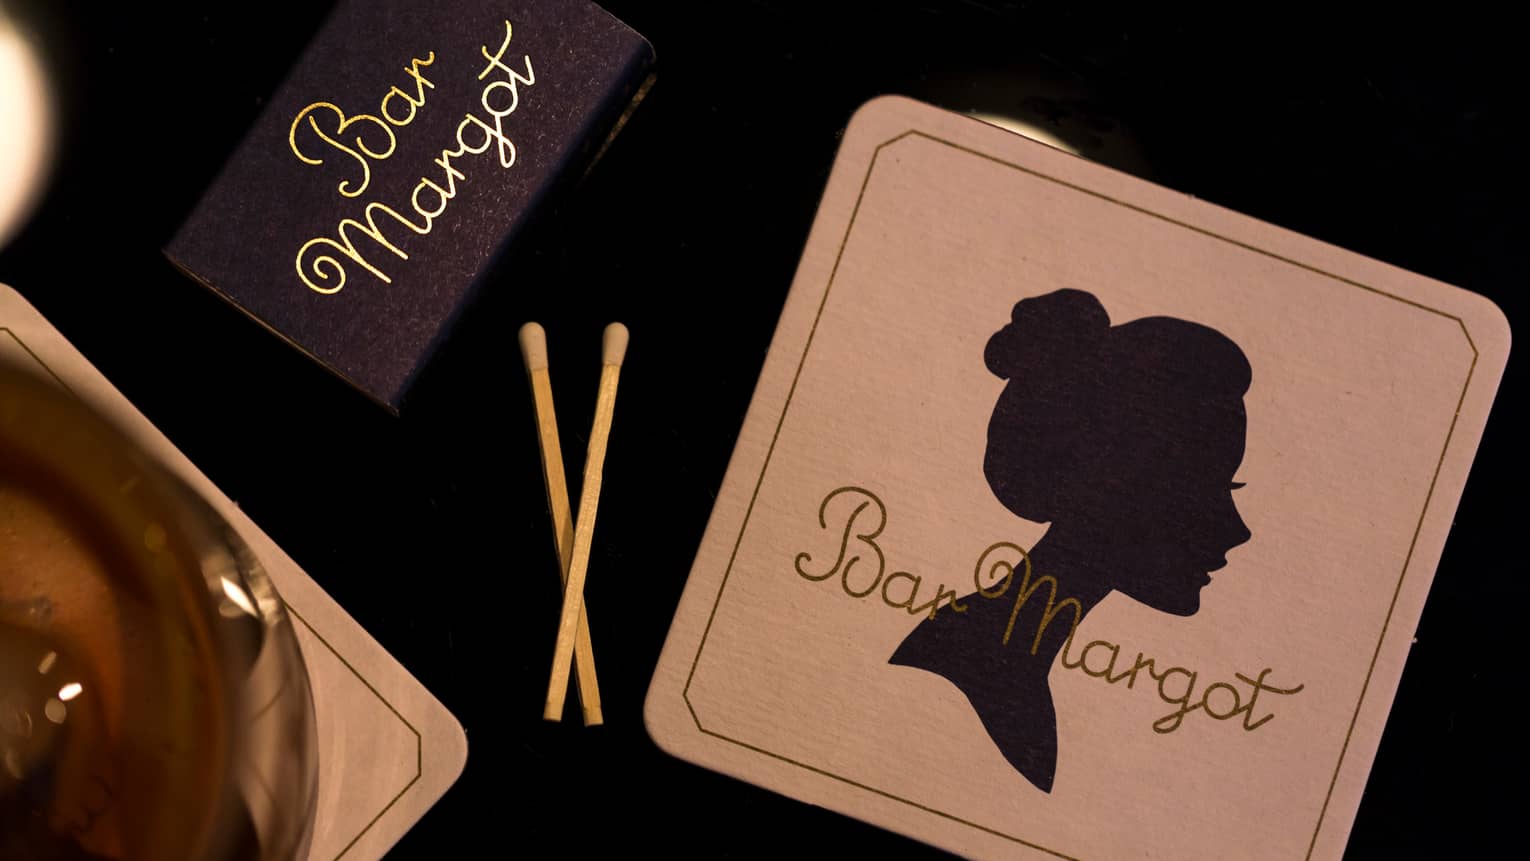 Bar Margot matchbox, two matches and coaster with vintage silhouette of woman's face